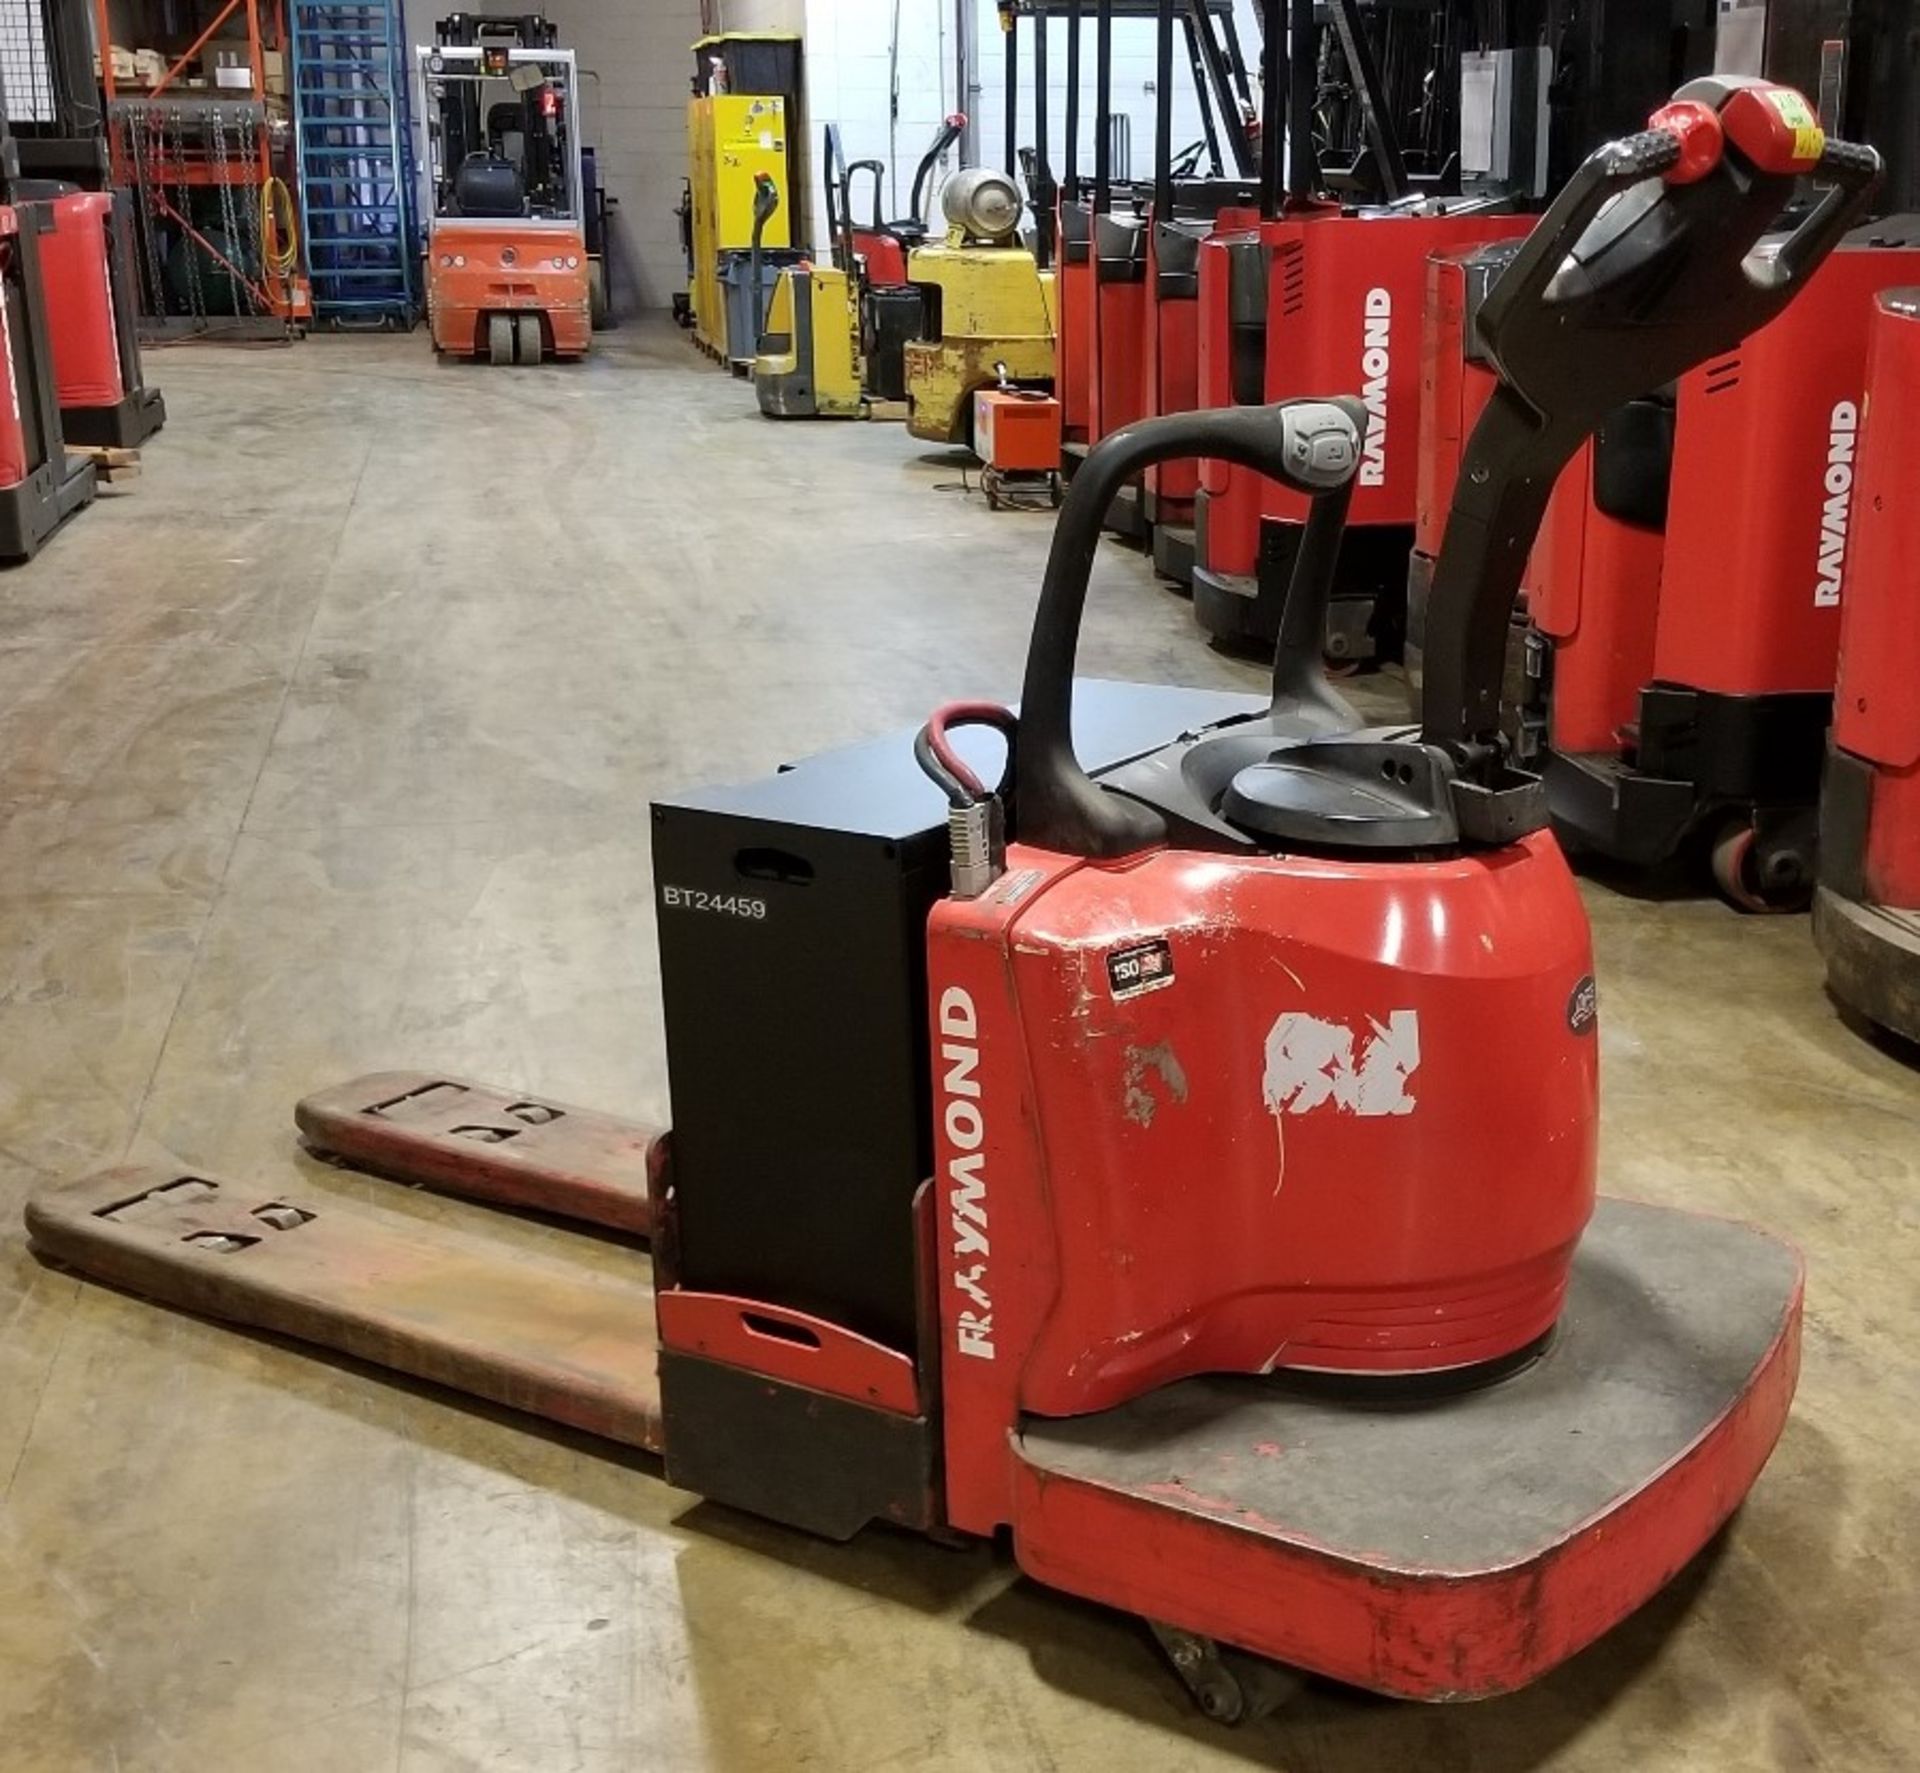 RAYMOND (2009) 8400 24V ELECTRIC RIDE-ON PALLET JACK WITH 6000 LB. CAPACITY, S/N: 840-09-81310 (UNIT